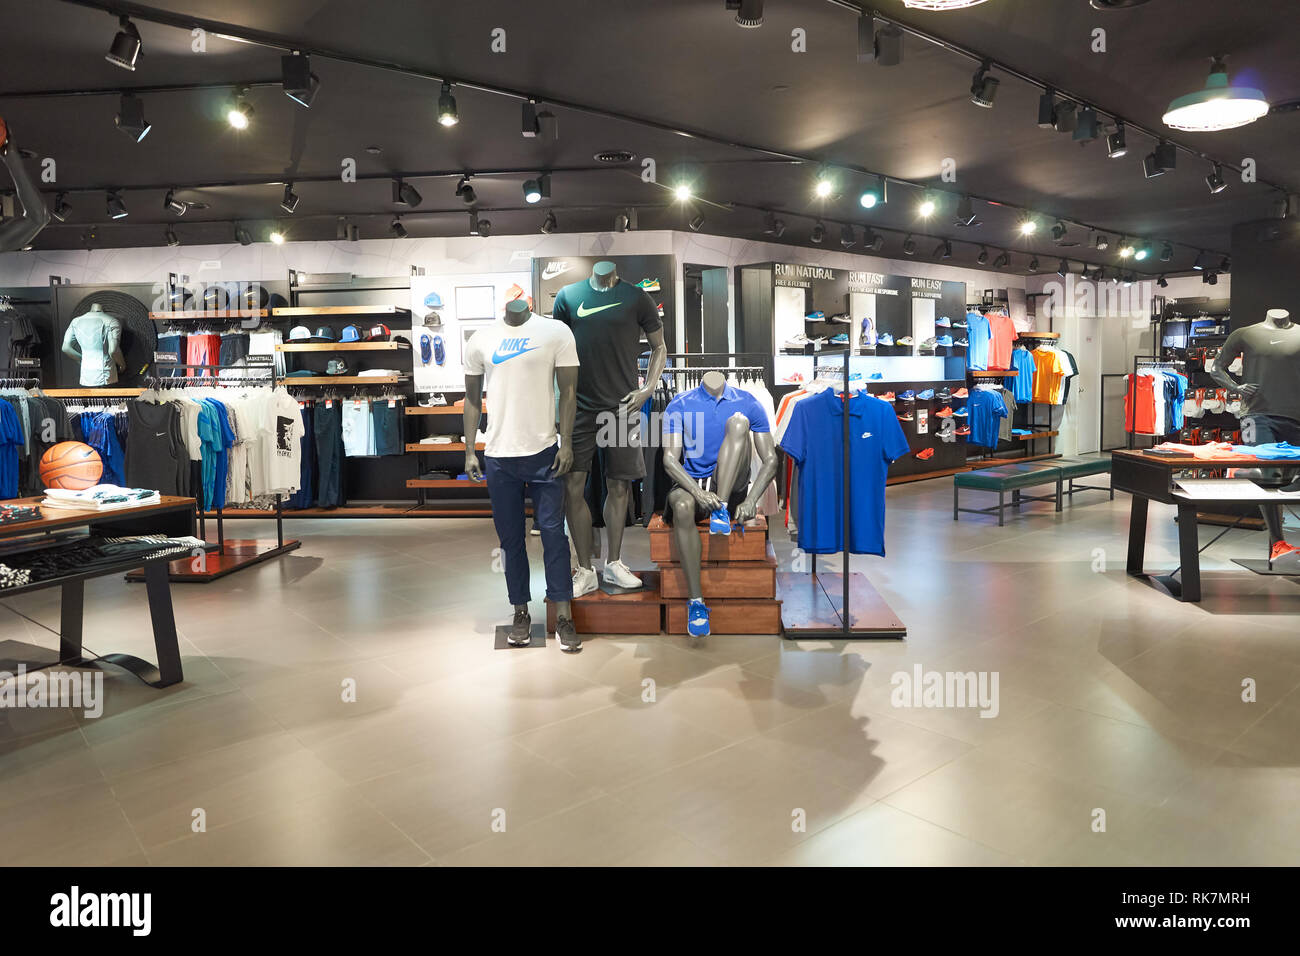 KUALA LUMPUR, MALAYSIA - MAY 09, 2016: Nike store in Suria KLCC. Suria KLCC  is a shopping mall is located in the Kuala Lumpur City Centre district. It  Stock Photo - Alamy